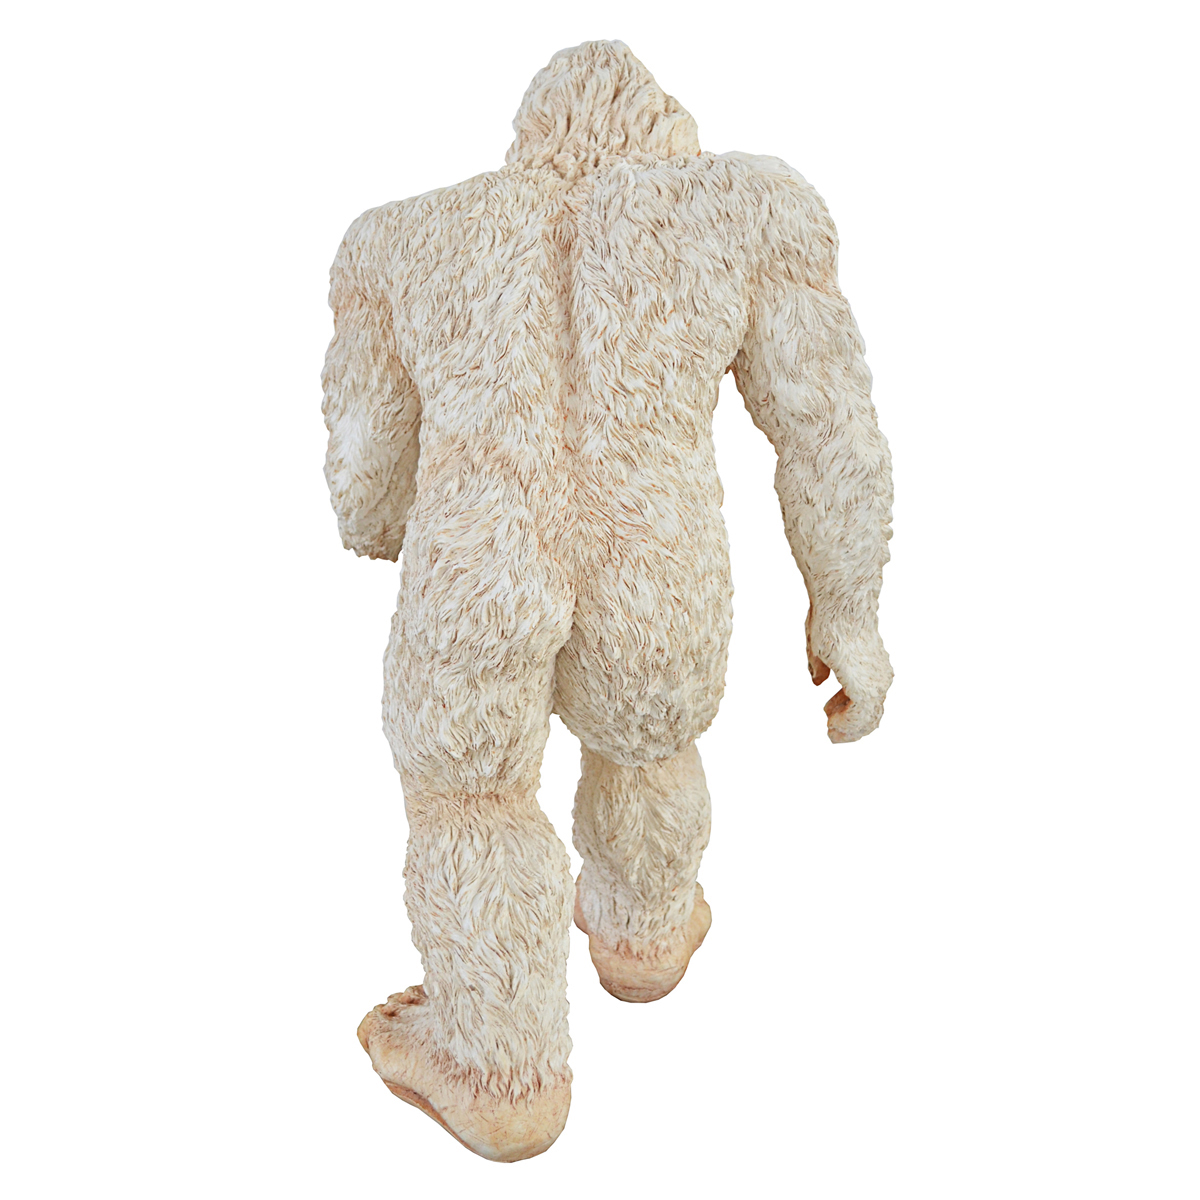 Image Thumbnail for Large Abominable Snowman Yeti Statue           